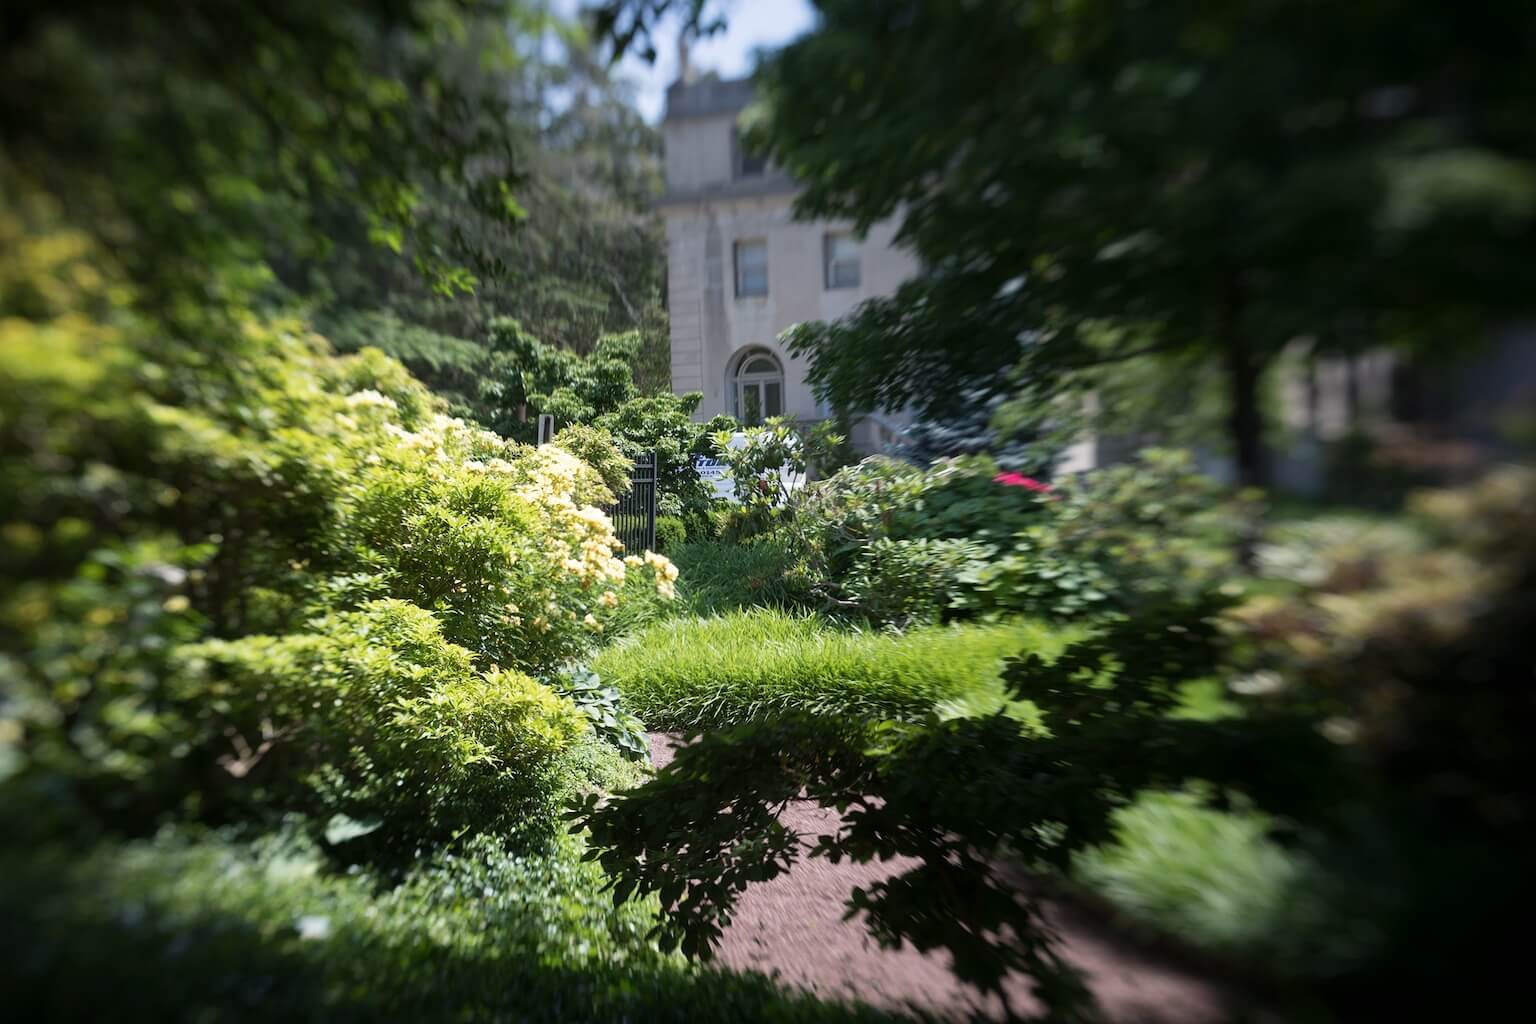 Photo from within the Sculpture Garden